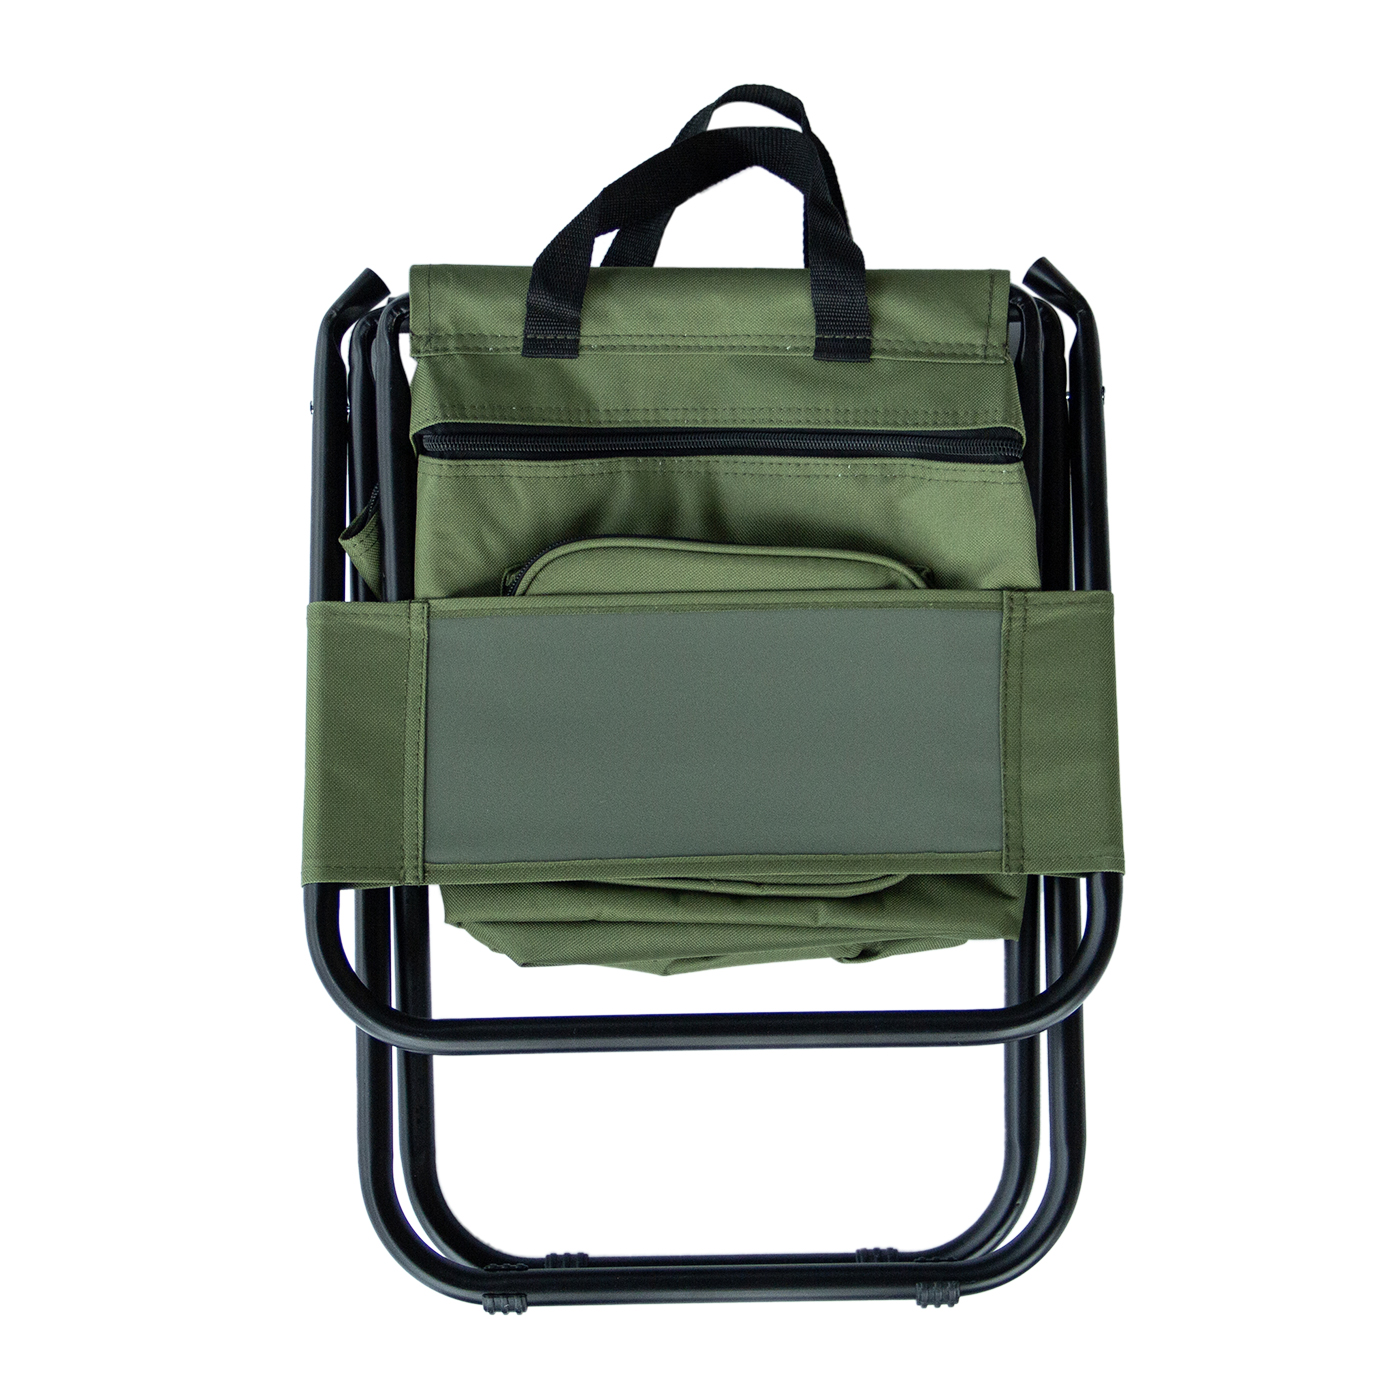 Folding Stool Chair With Cooler Bag2